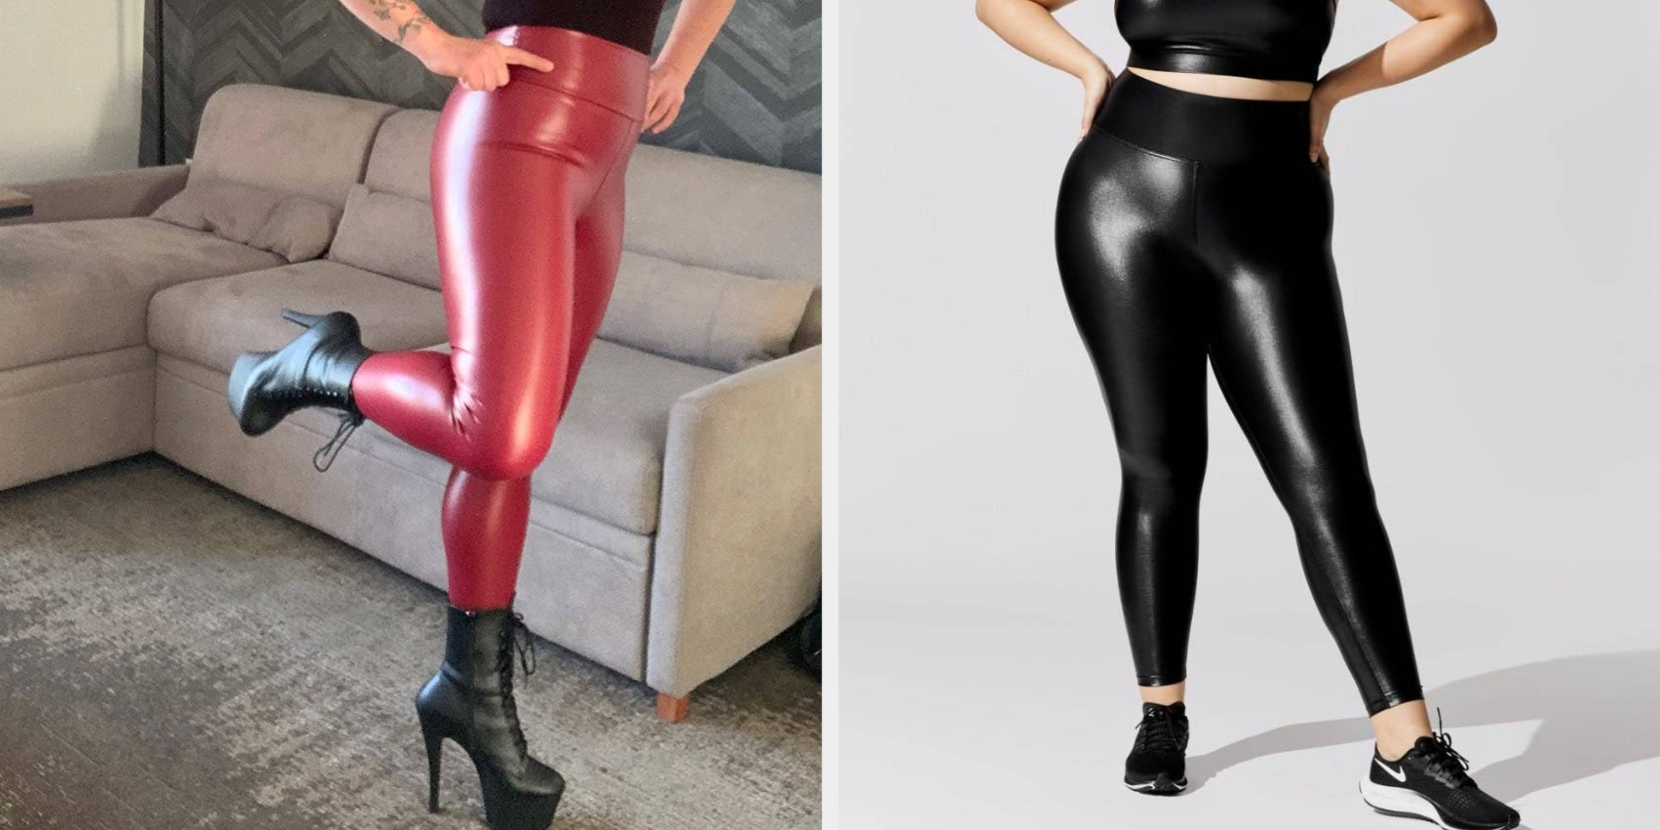 I found the perfect leather leggings from New Look - they're great